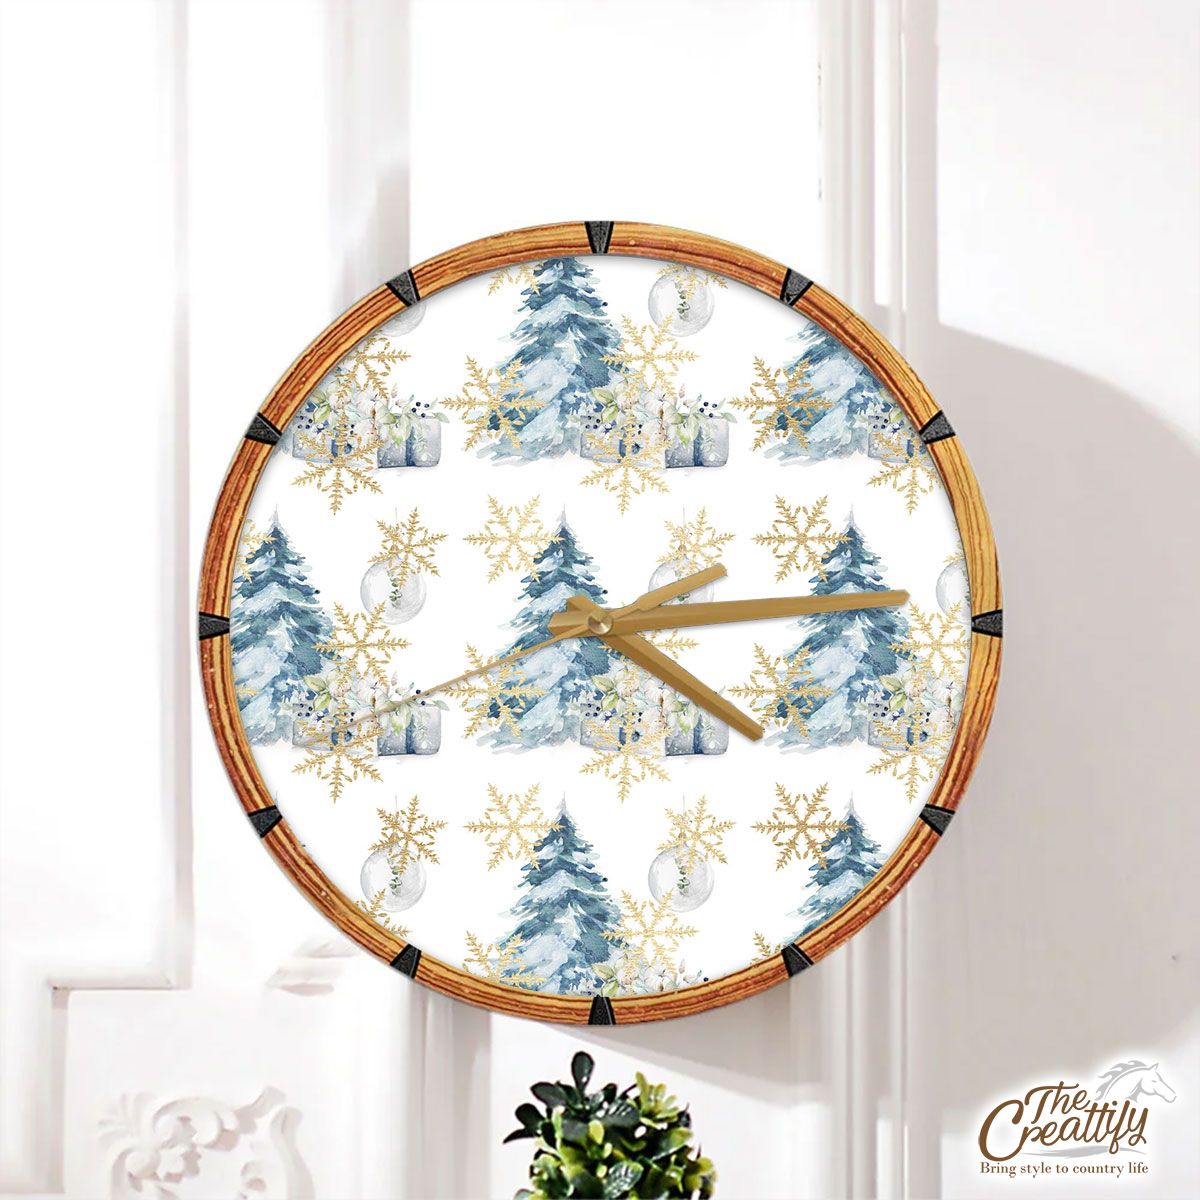 Chistmas Gifts, Gold Snowflake Clipart, Pine Tree And Chistmas Balls Seamless White Pattern Wall Clock